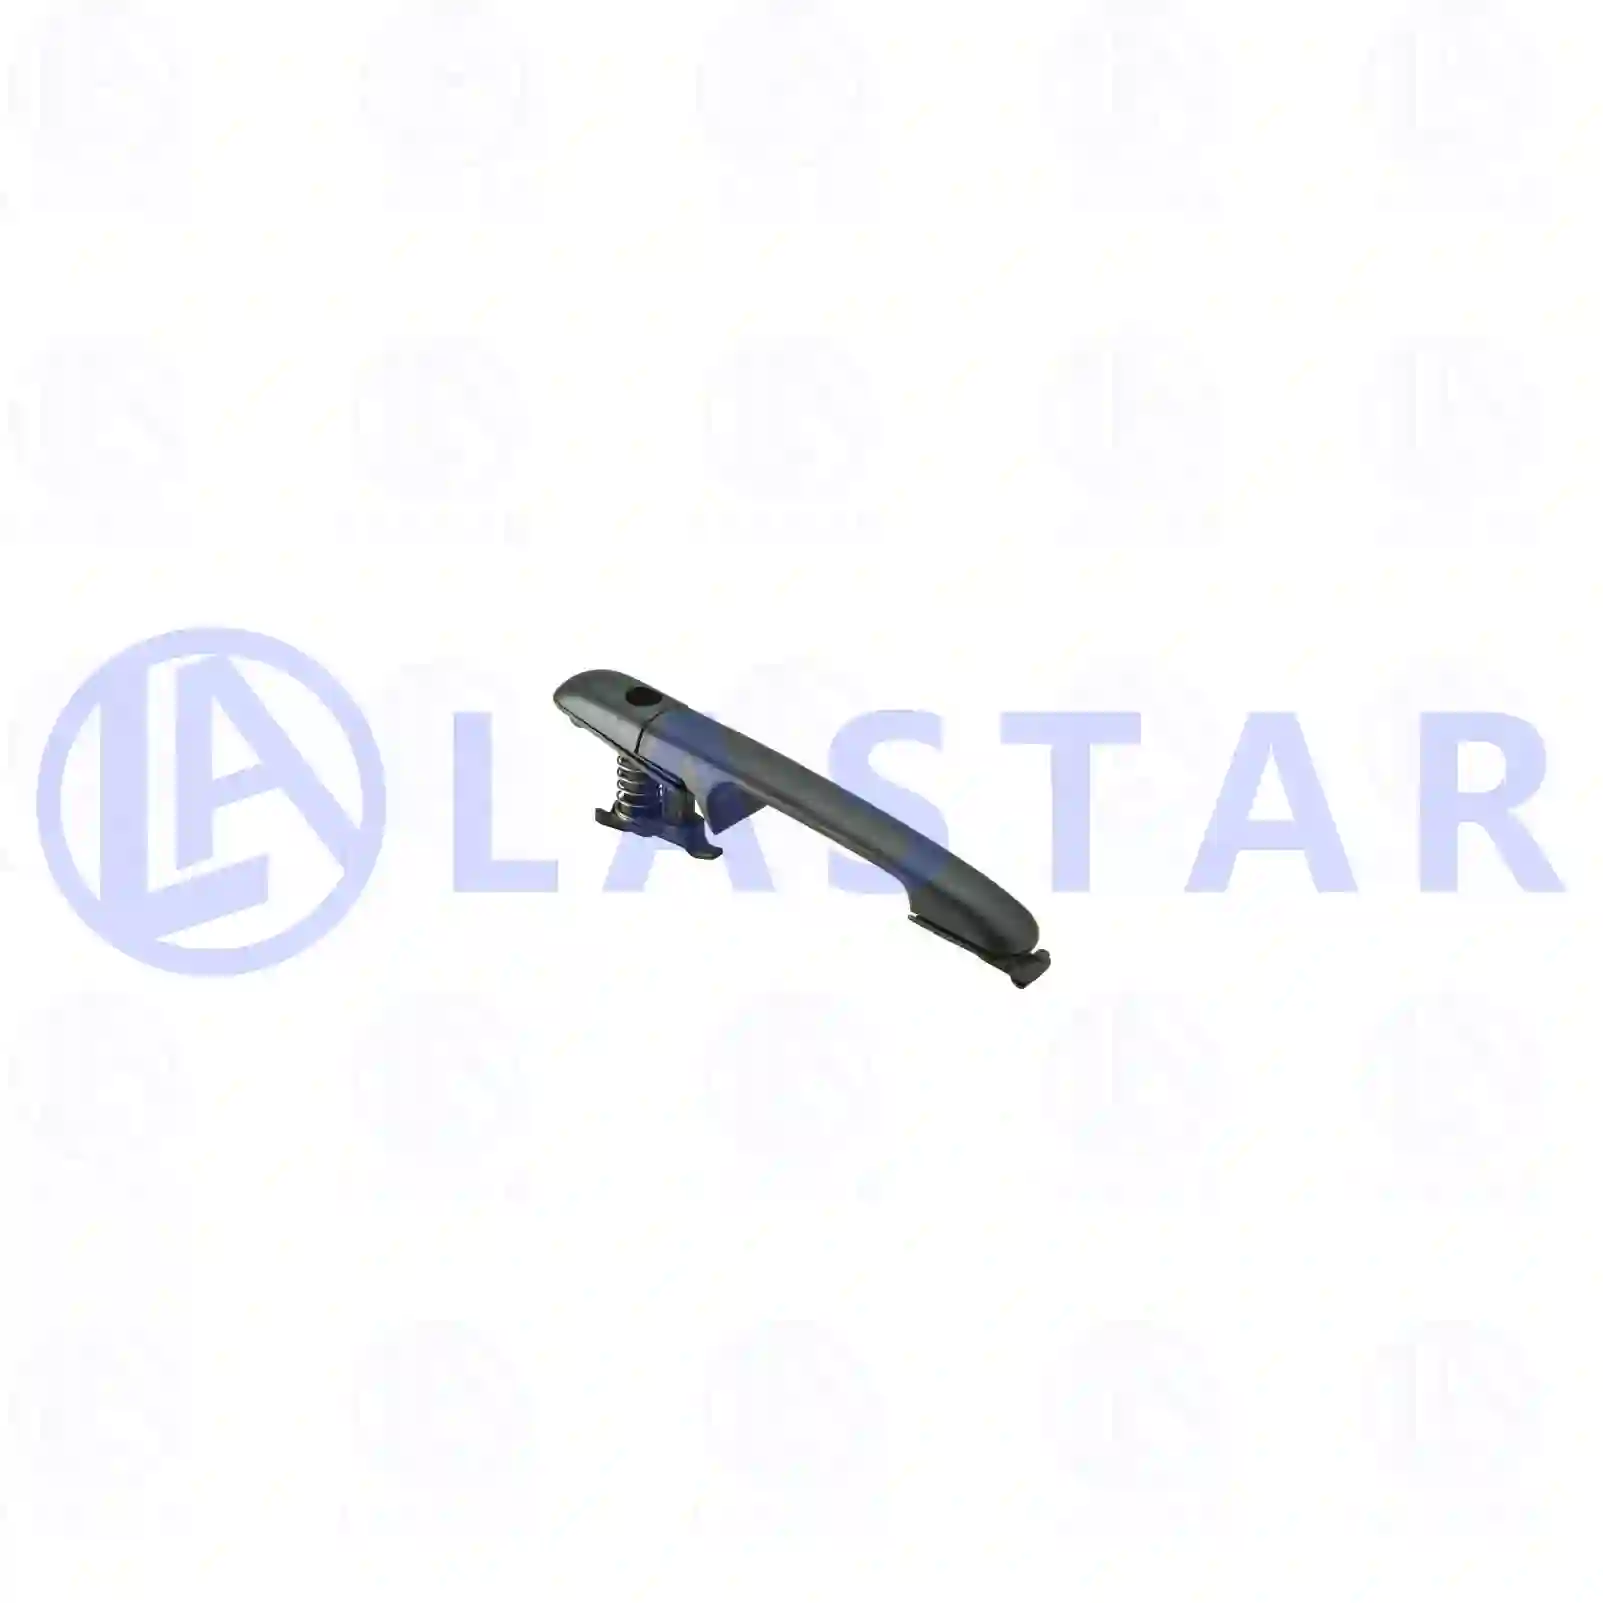  Door handle, lateral || Lastar Spare Part | Truck Spare Parts, Auotomotive Spare Parts